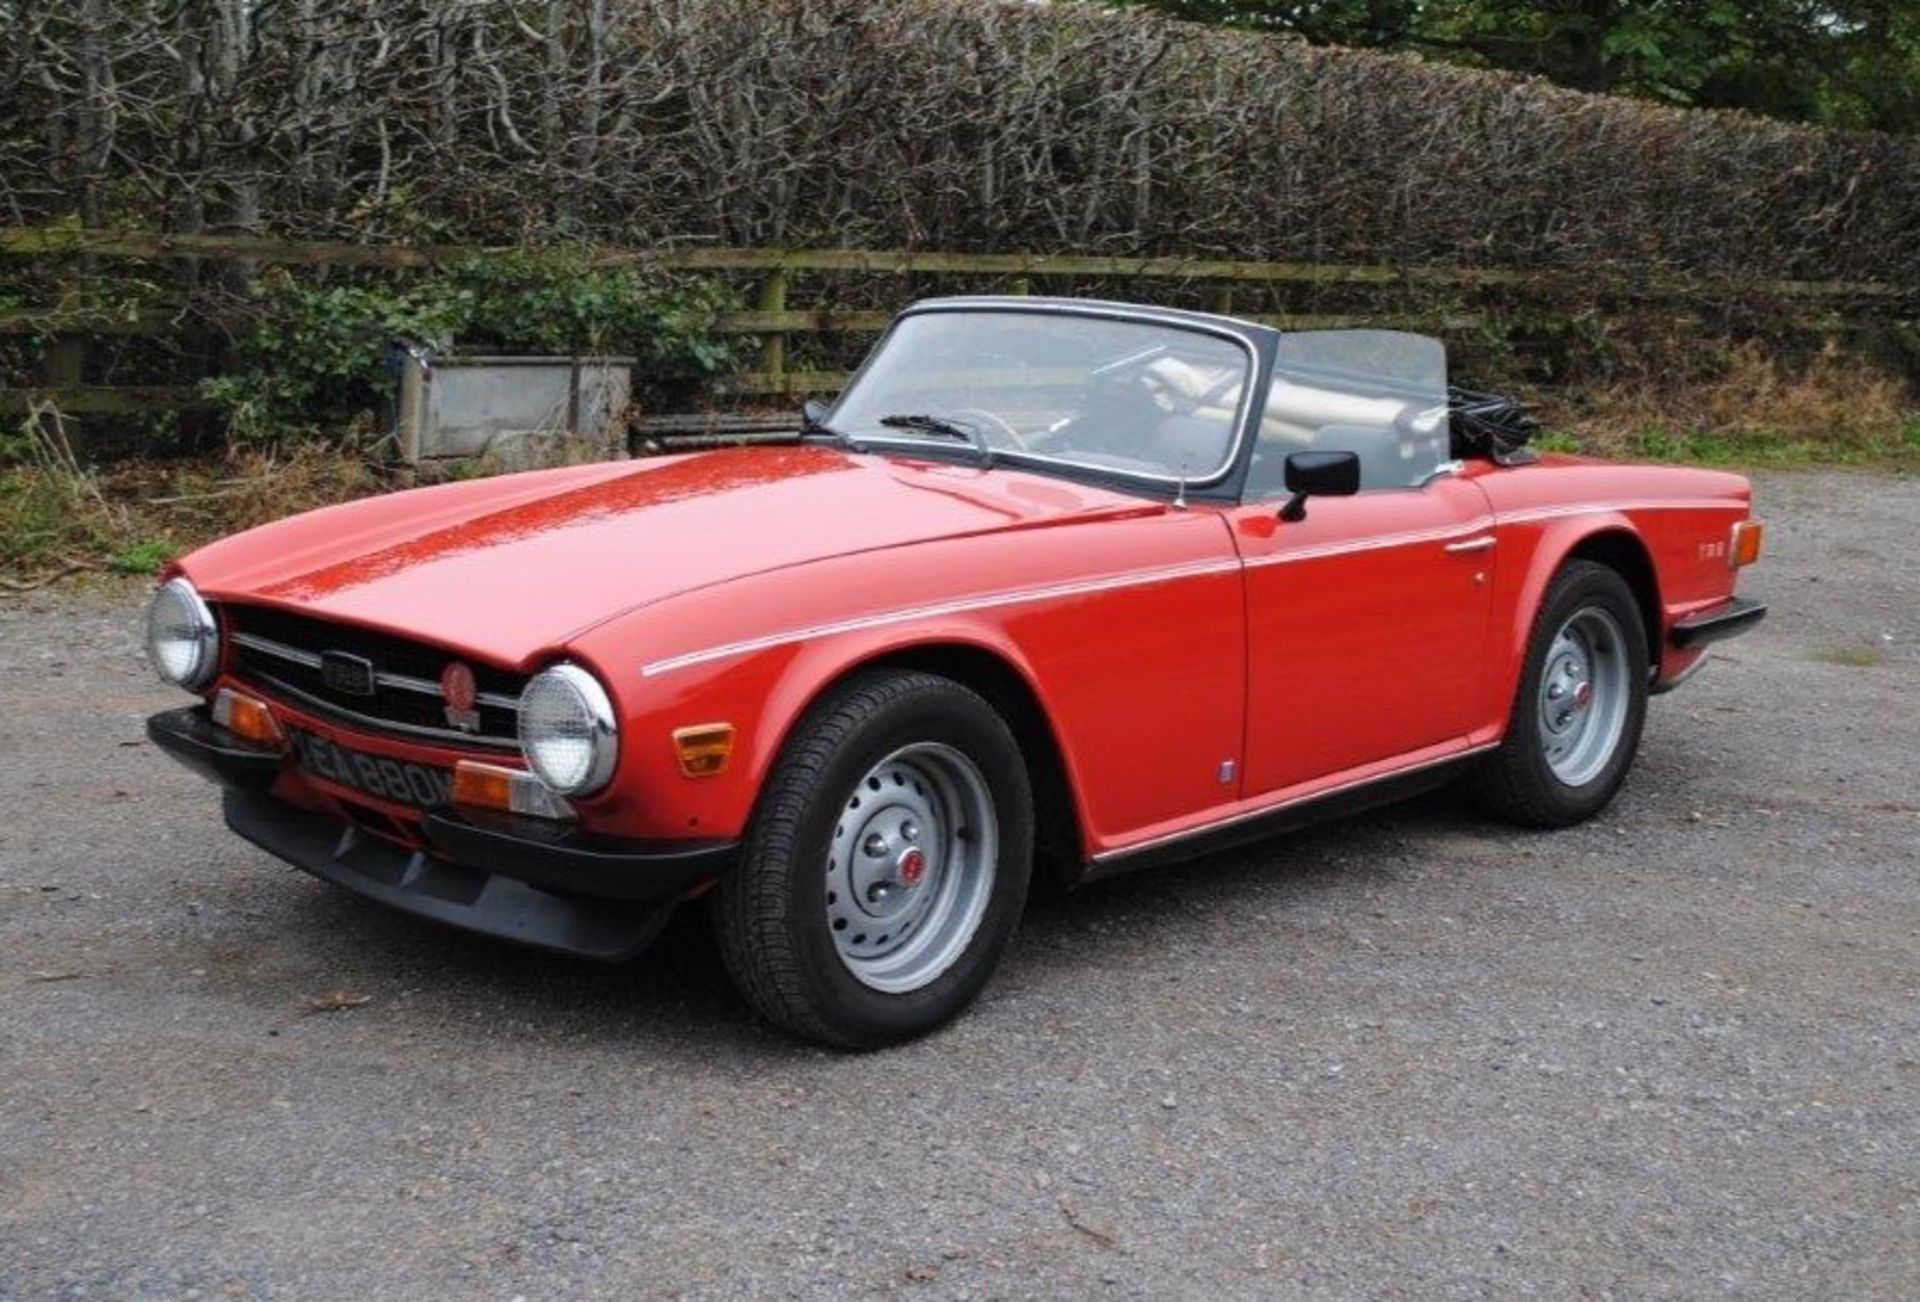 1974 TRIUMPH TR6 Registration Number: YEA 880M Chassis Number: CR51799 Recorded Mileage: 93,000